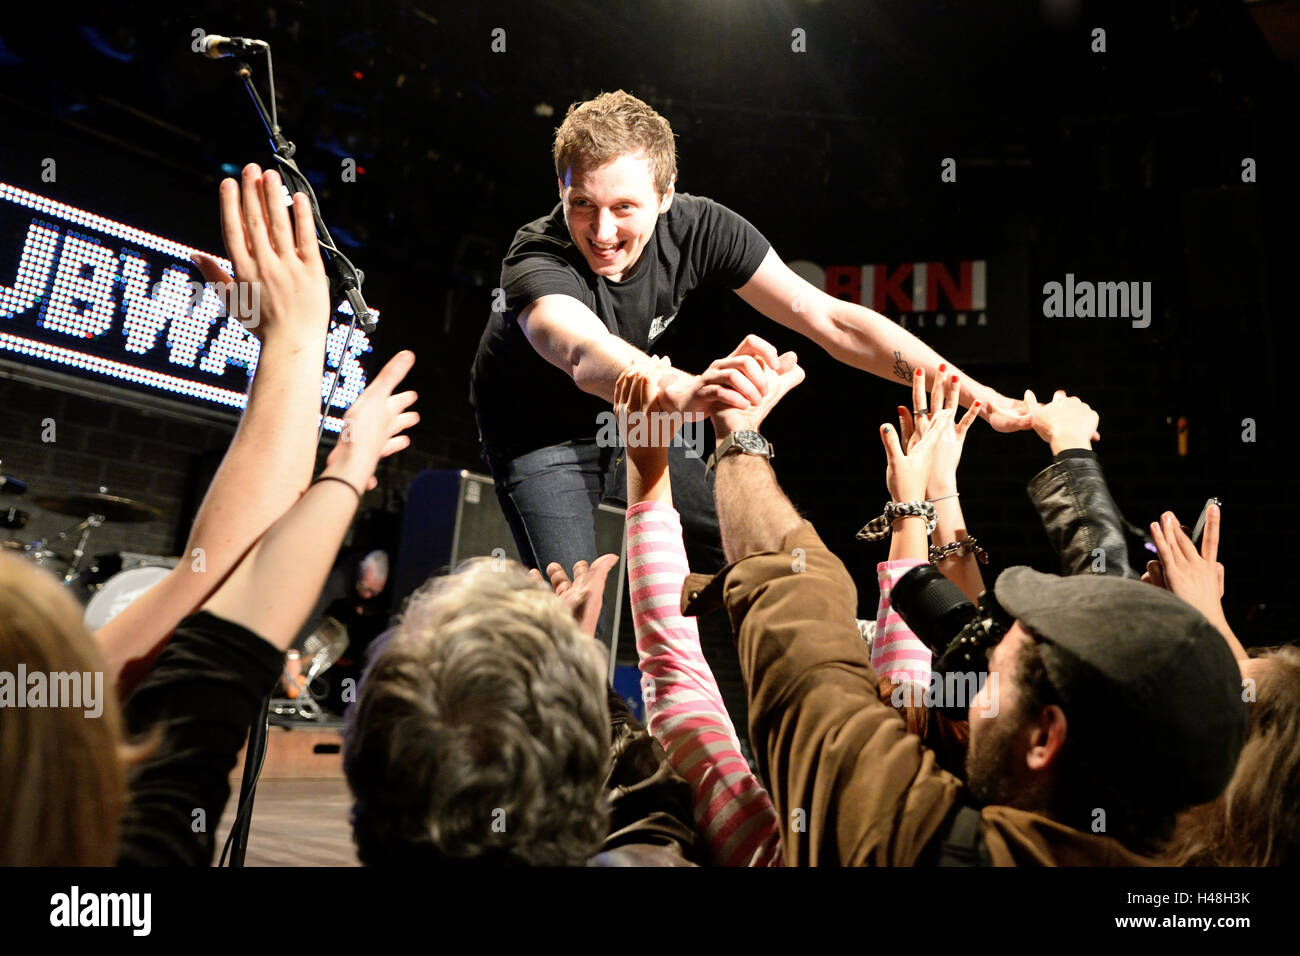 BARCELONA - MAR 18: The frontman of The Subways (rock band) performs with the crowd at Bikini stage. Stock Photo